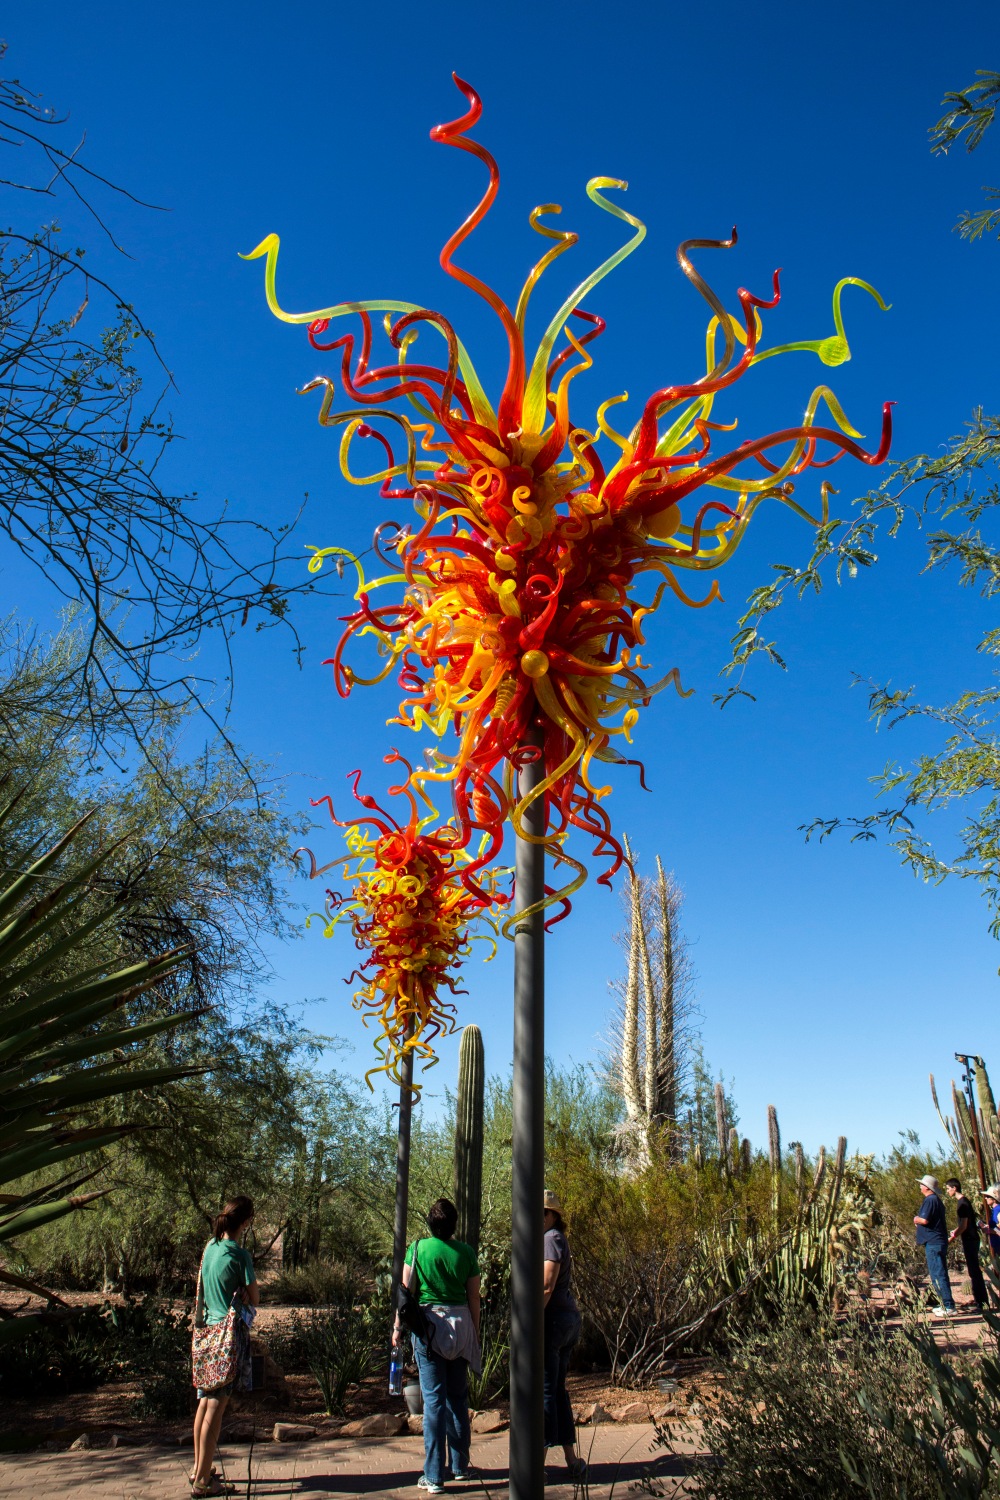 Dale Chihuly, Scarlet Asymmetrical Tower and Yellow Asymmetrical Tower, 2005